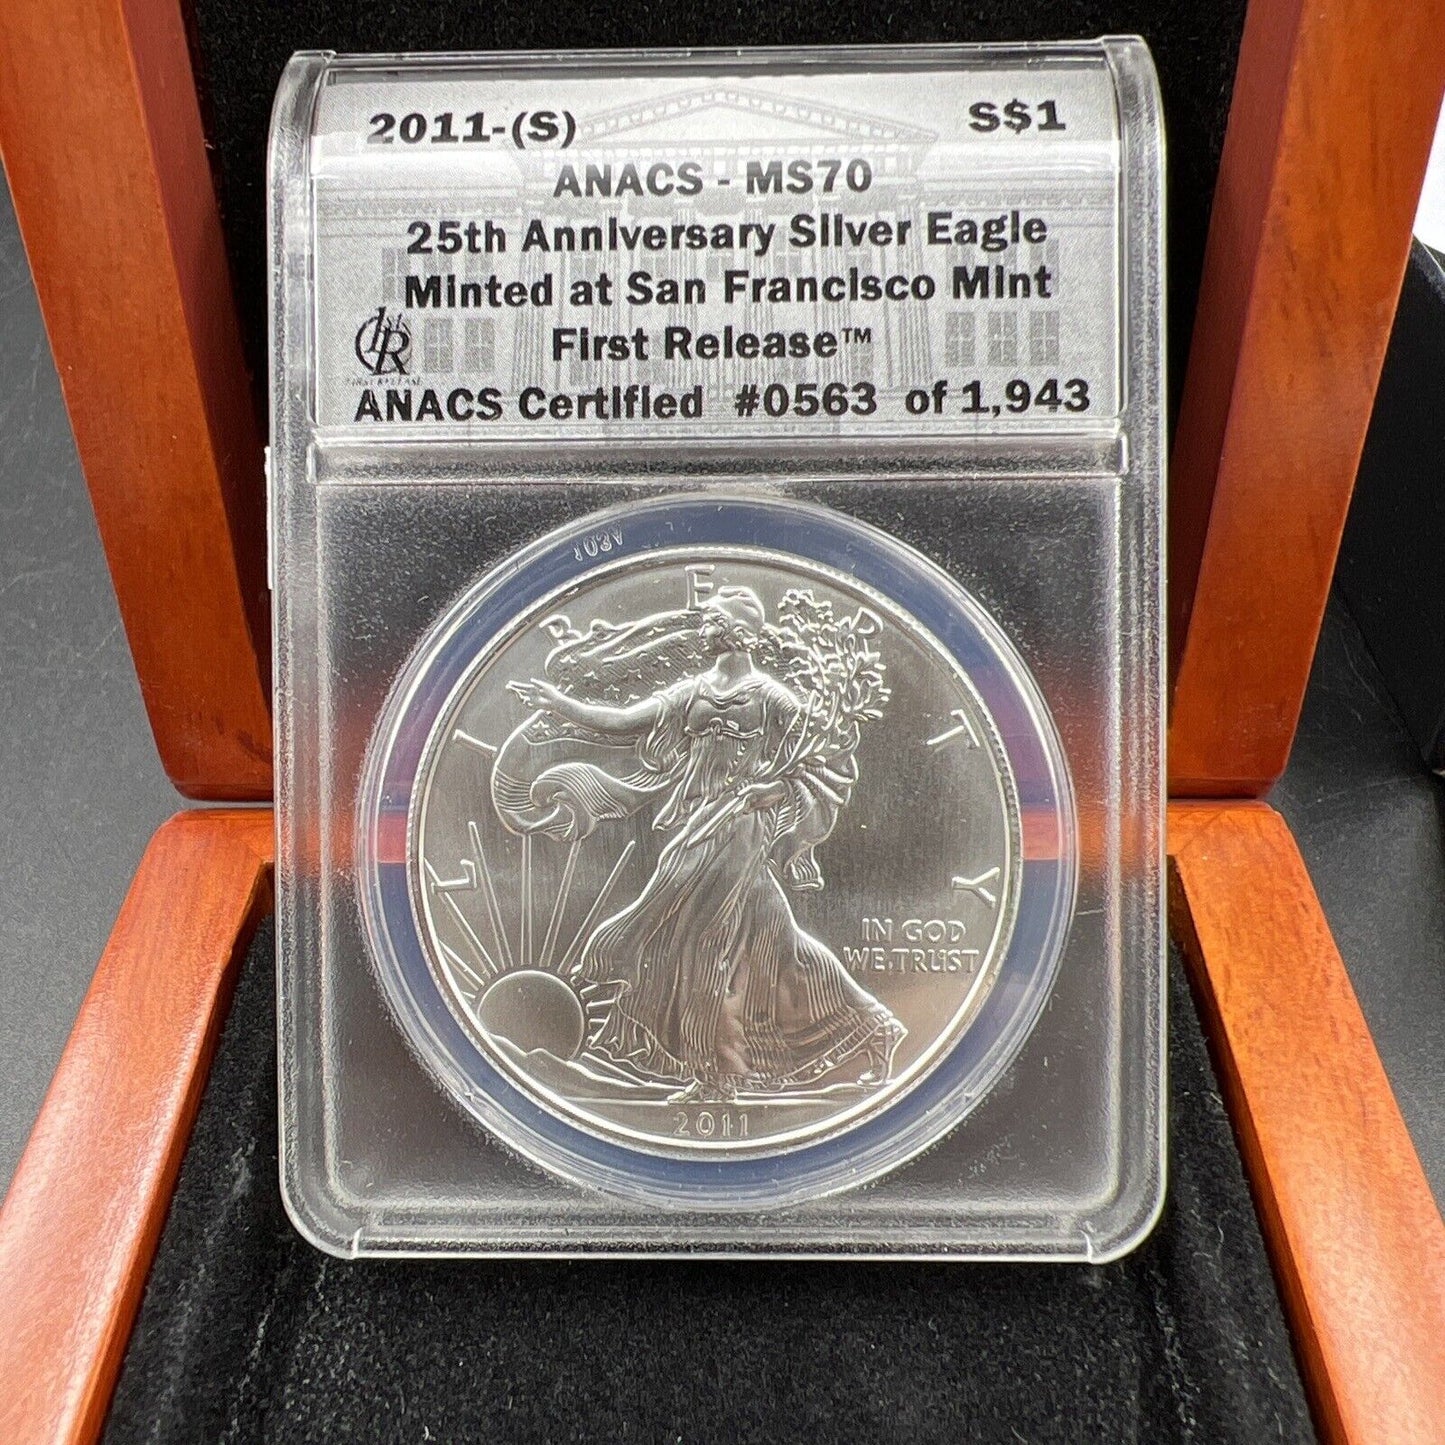 2011 S American 1oz Silver Eagle ANACS MS70 25th Anniversary ASE in Display #563